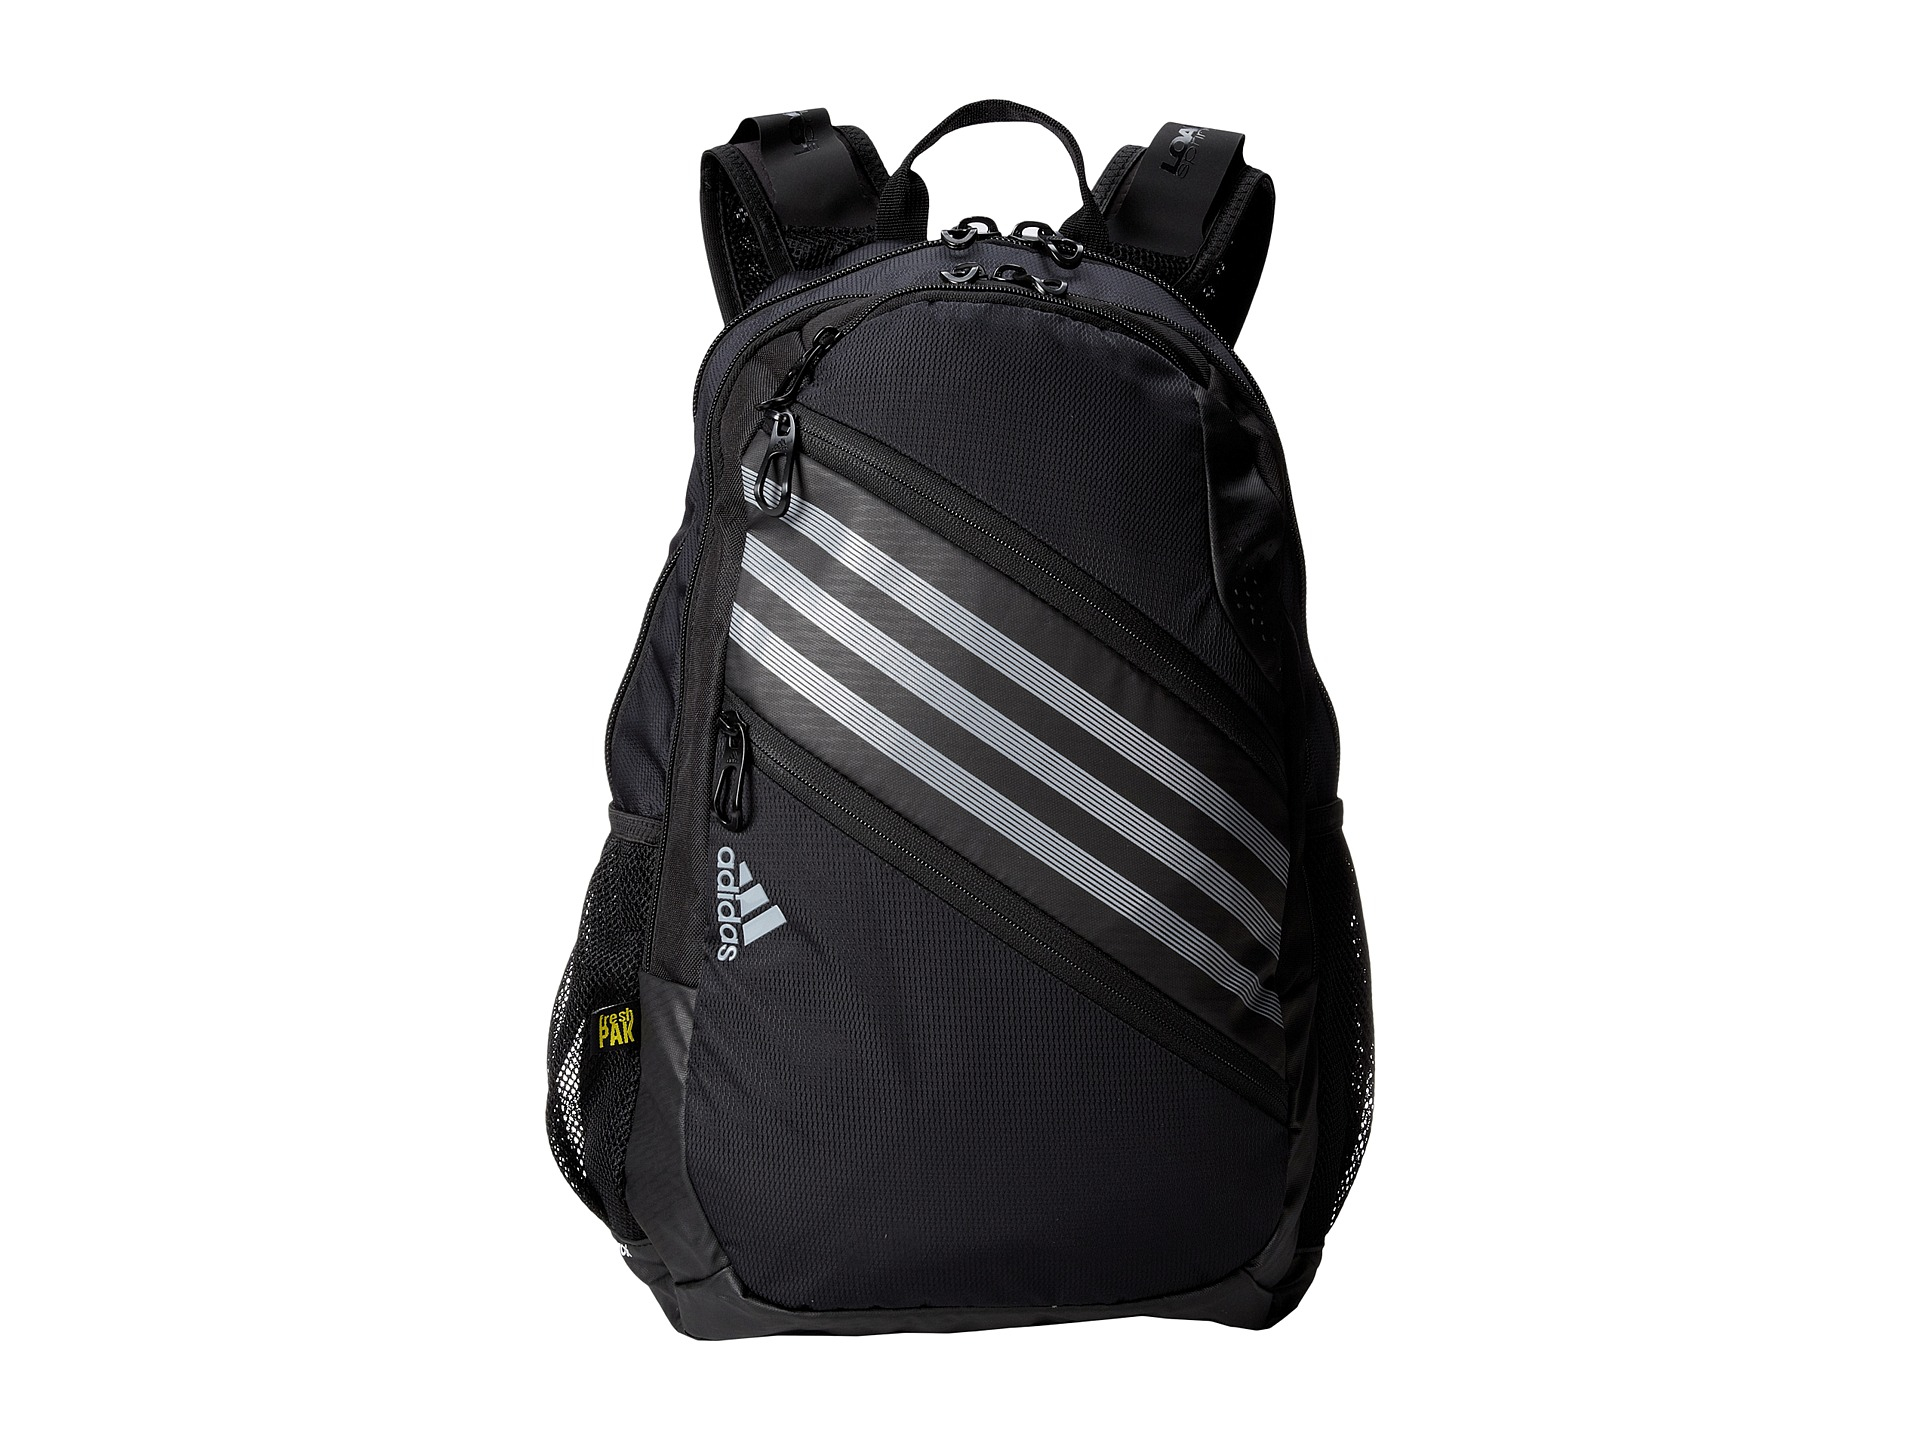 adidas Climacool Quick Backpack in Black - Lyst